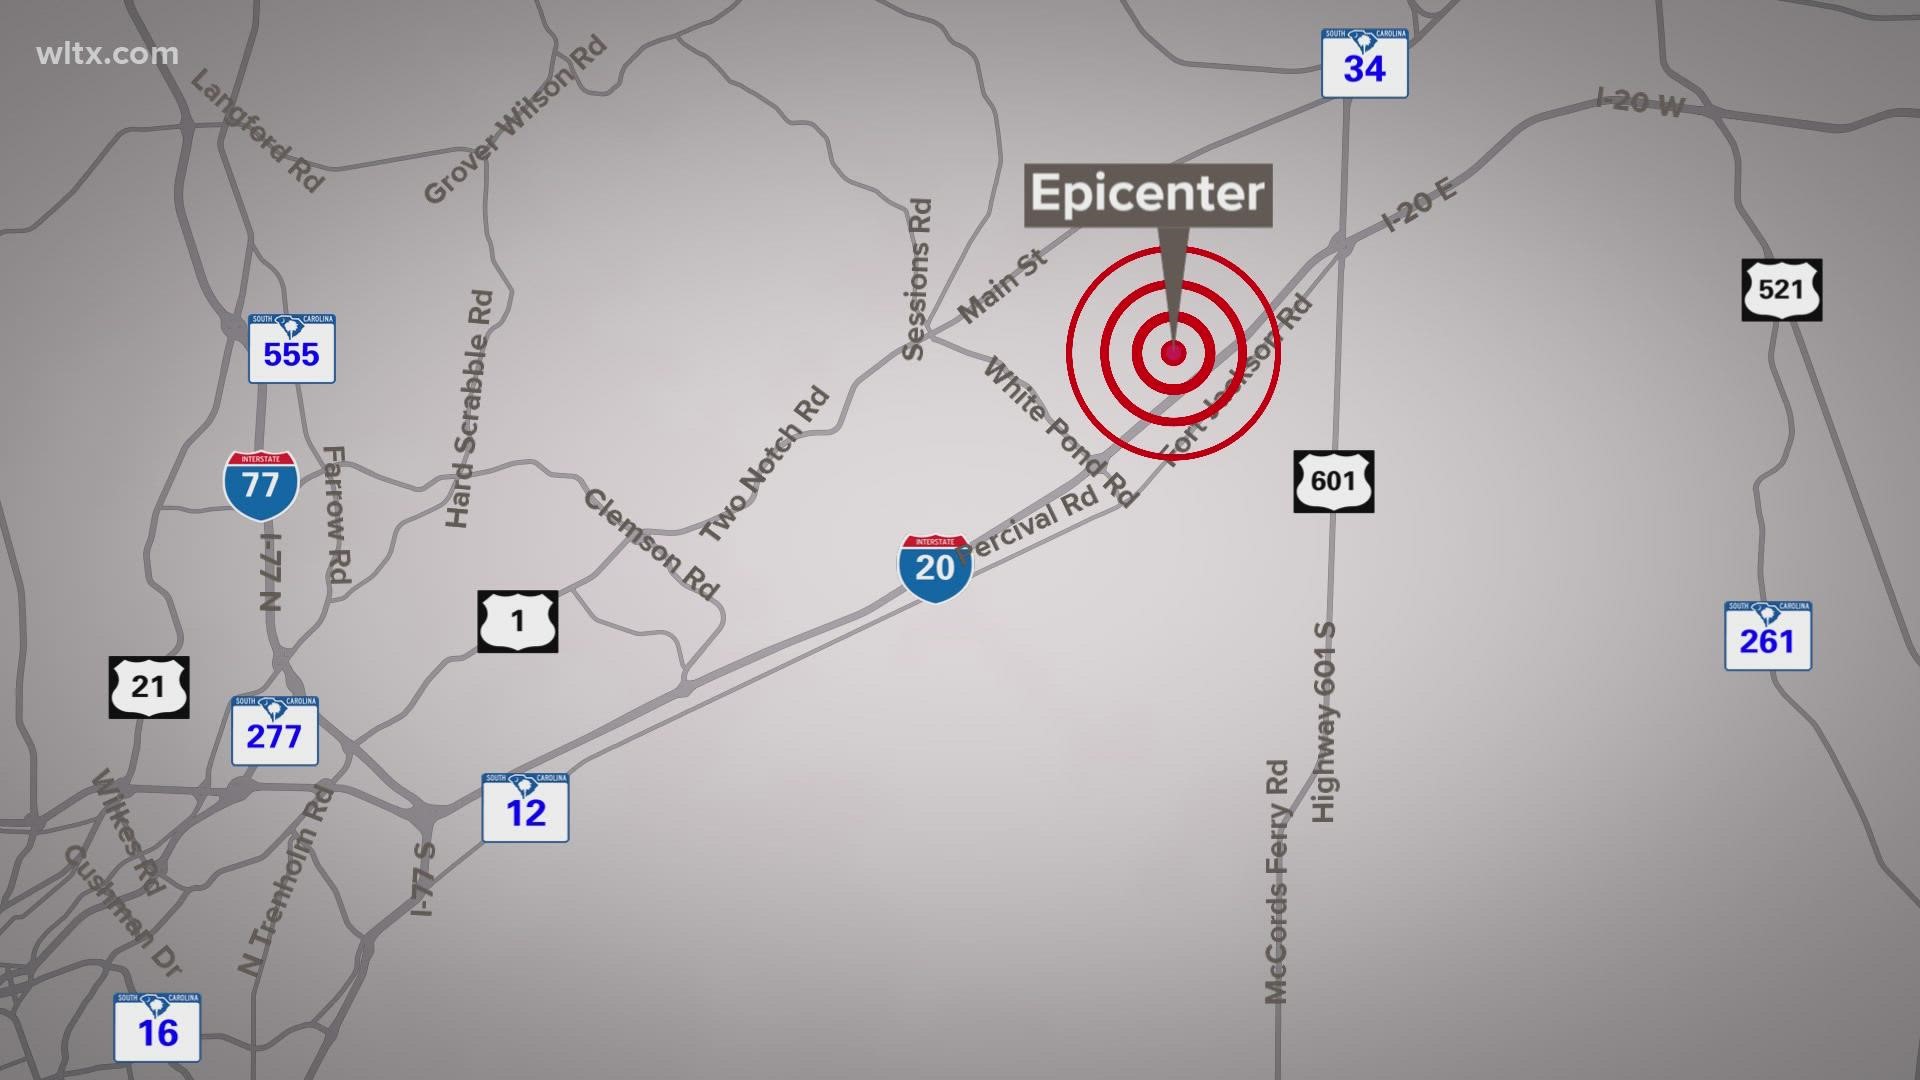 At around 2:43 Wednesday afternoon, a 3.5 magnitude quake was felt across the area.